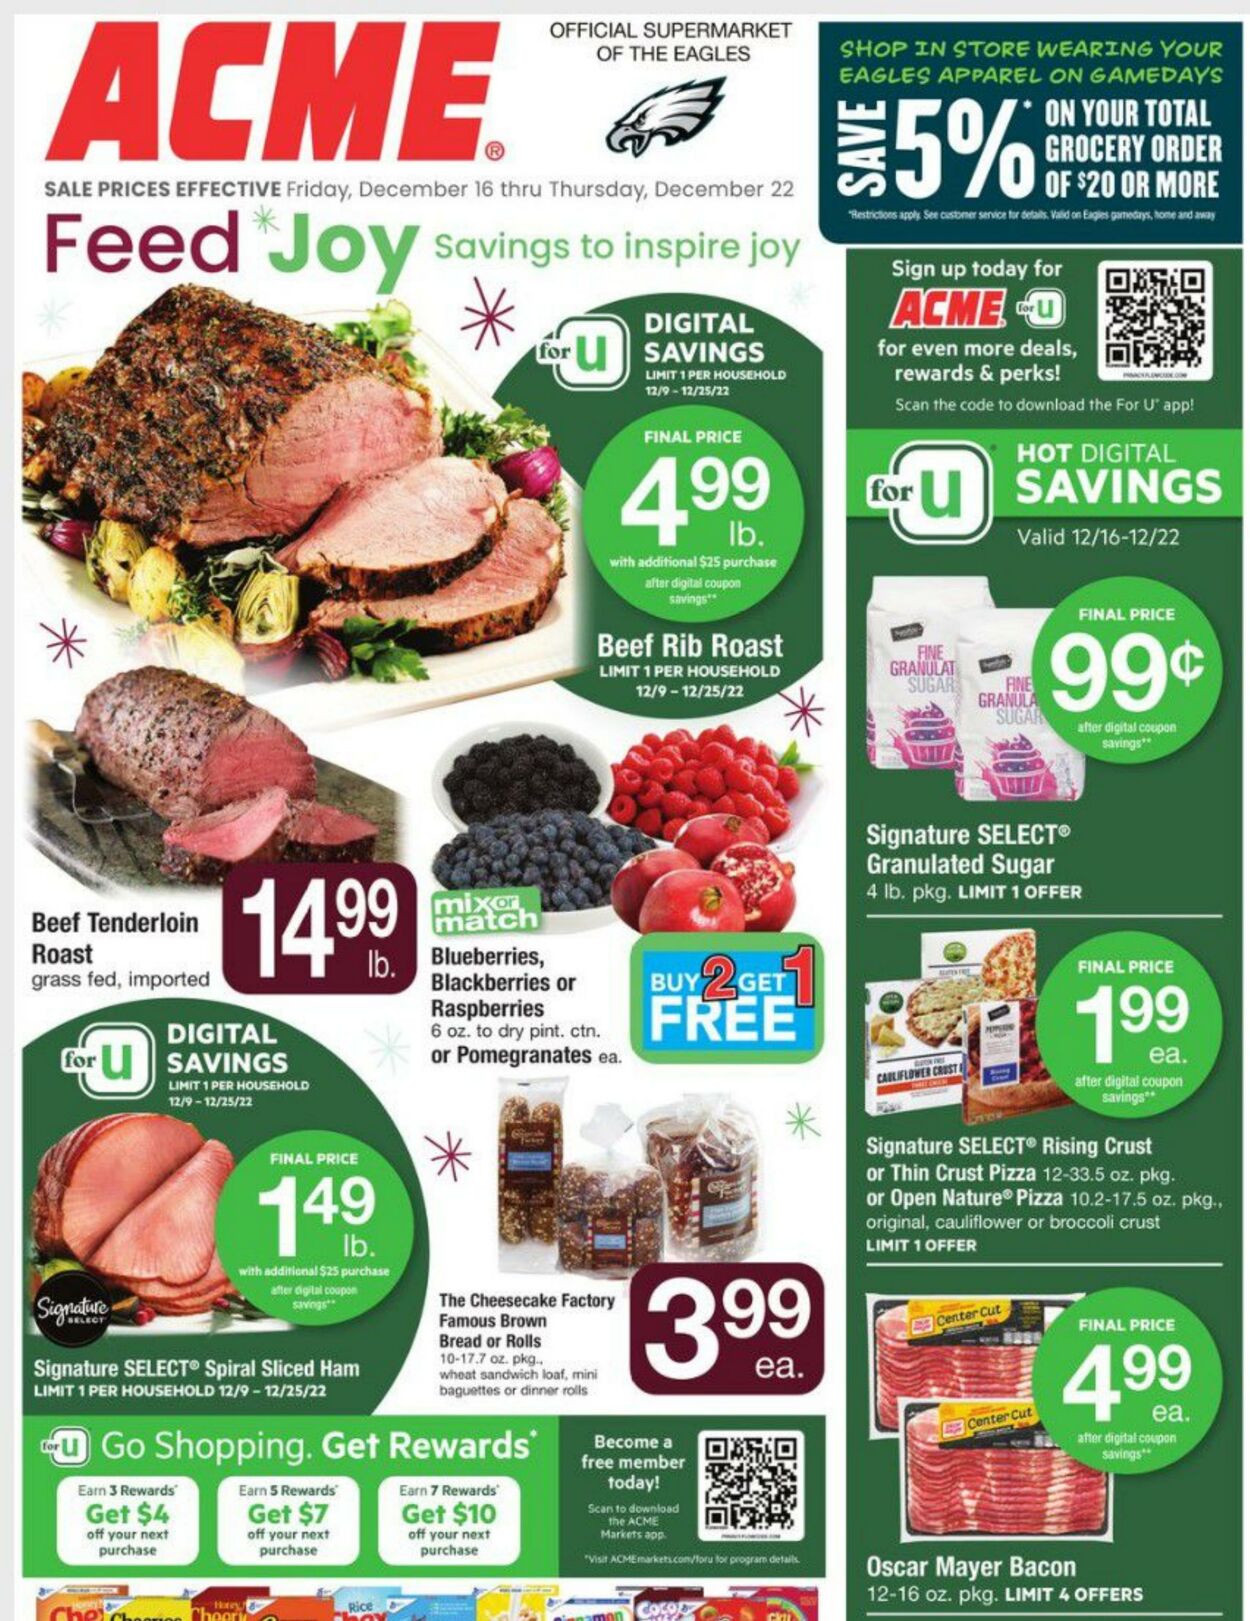 Acme Current weekly ad 12/29 Weekly Ads, Promotions